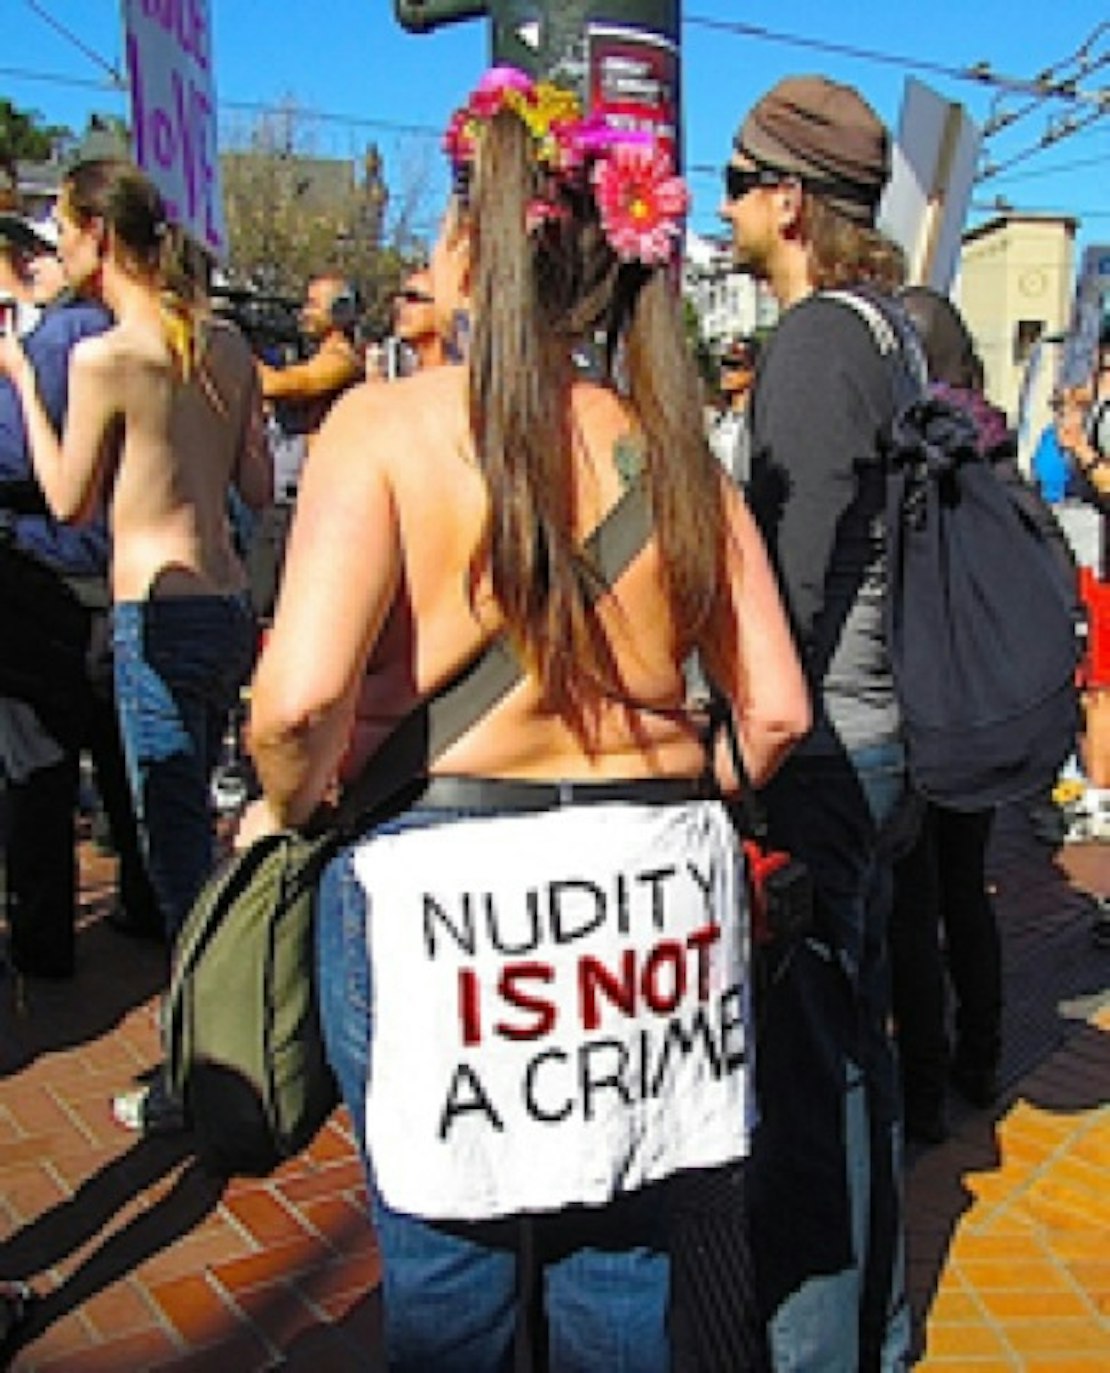 Naked Nudists Doing The Dirty - Body Freedom Rally Ends In Police Force